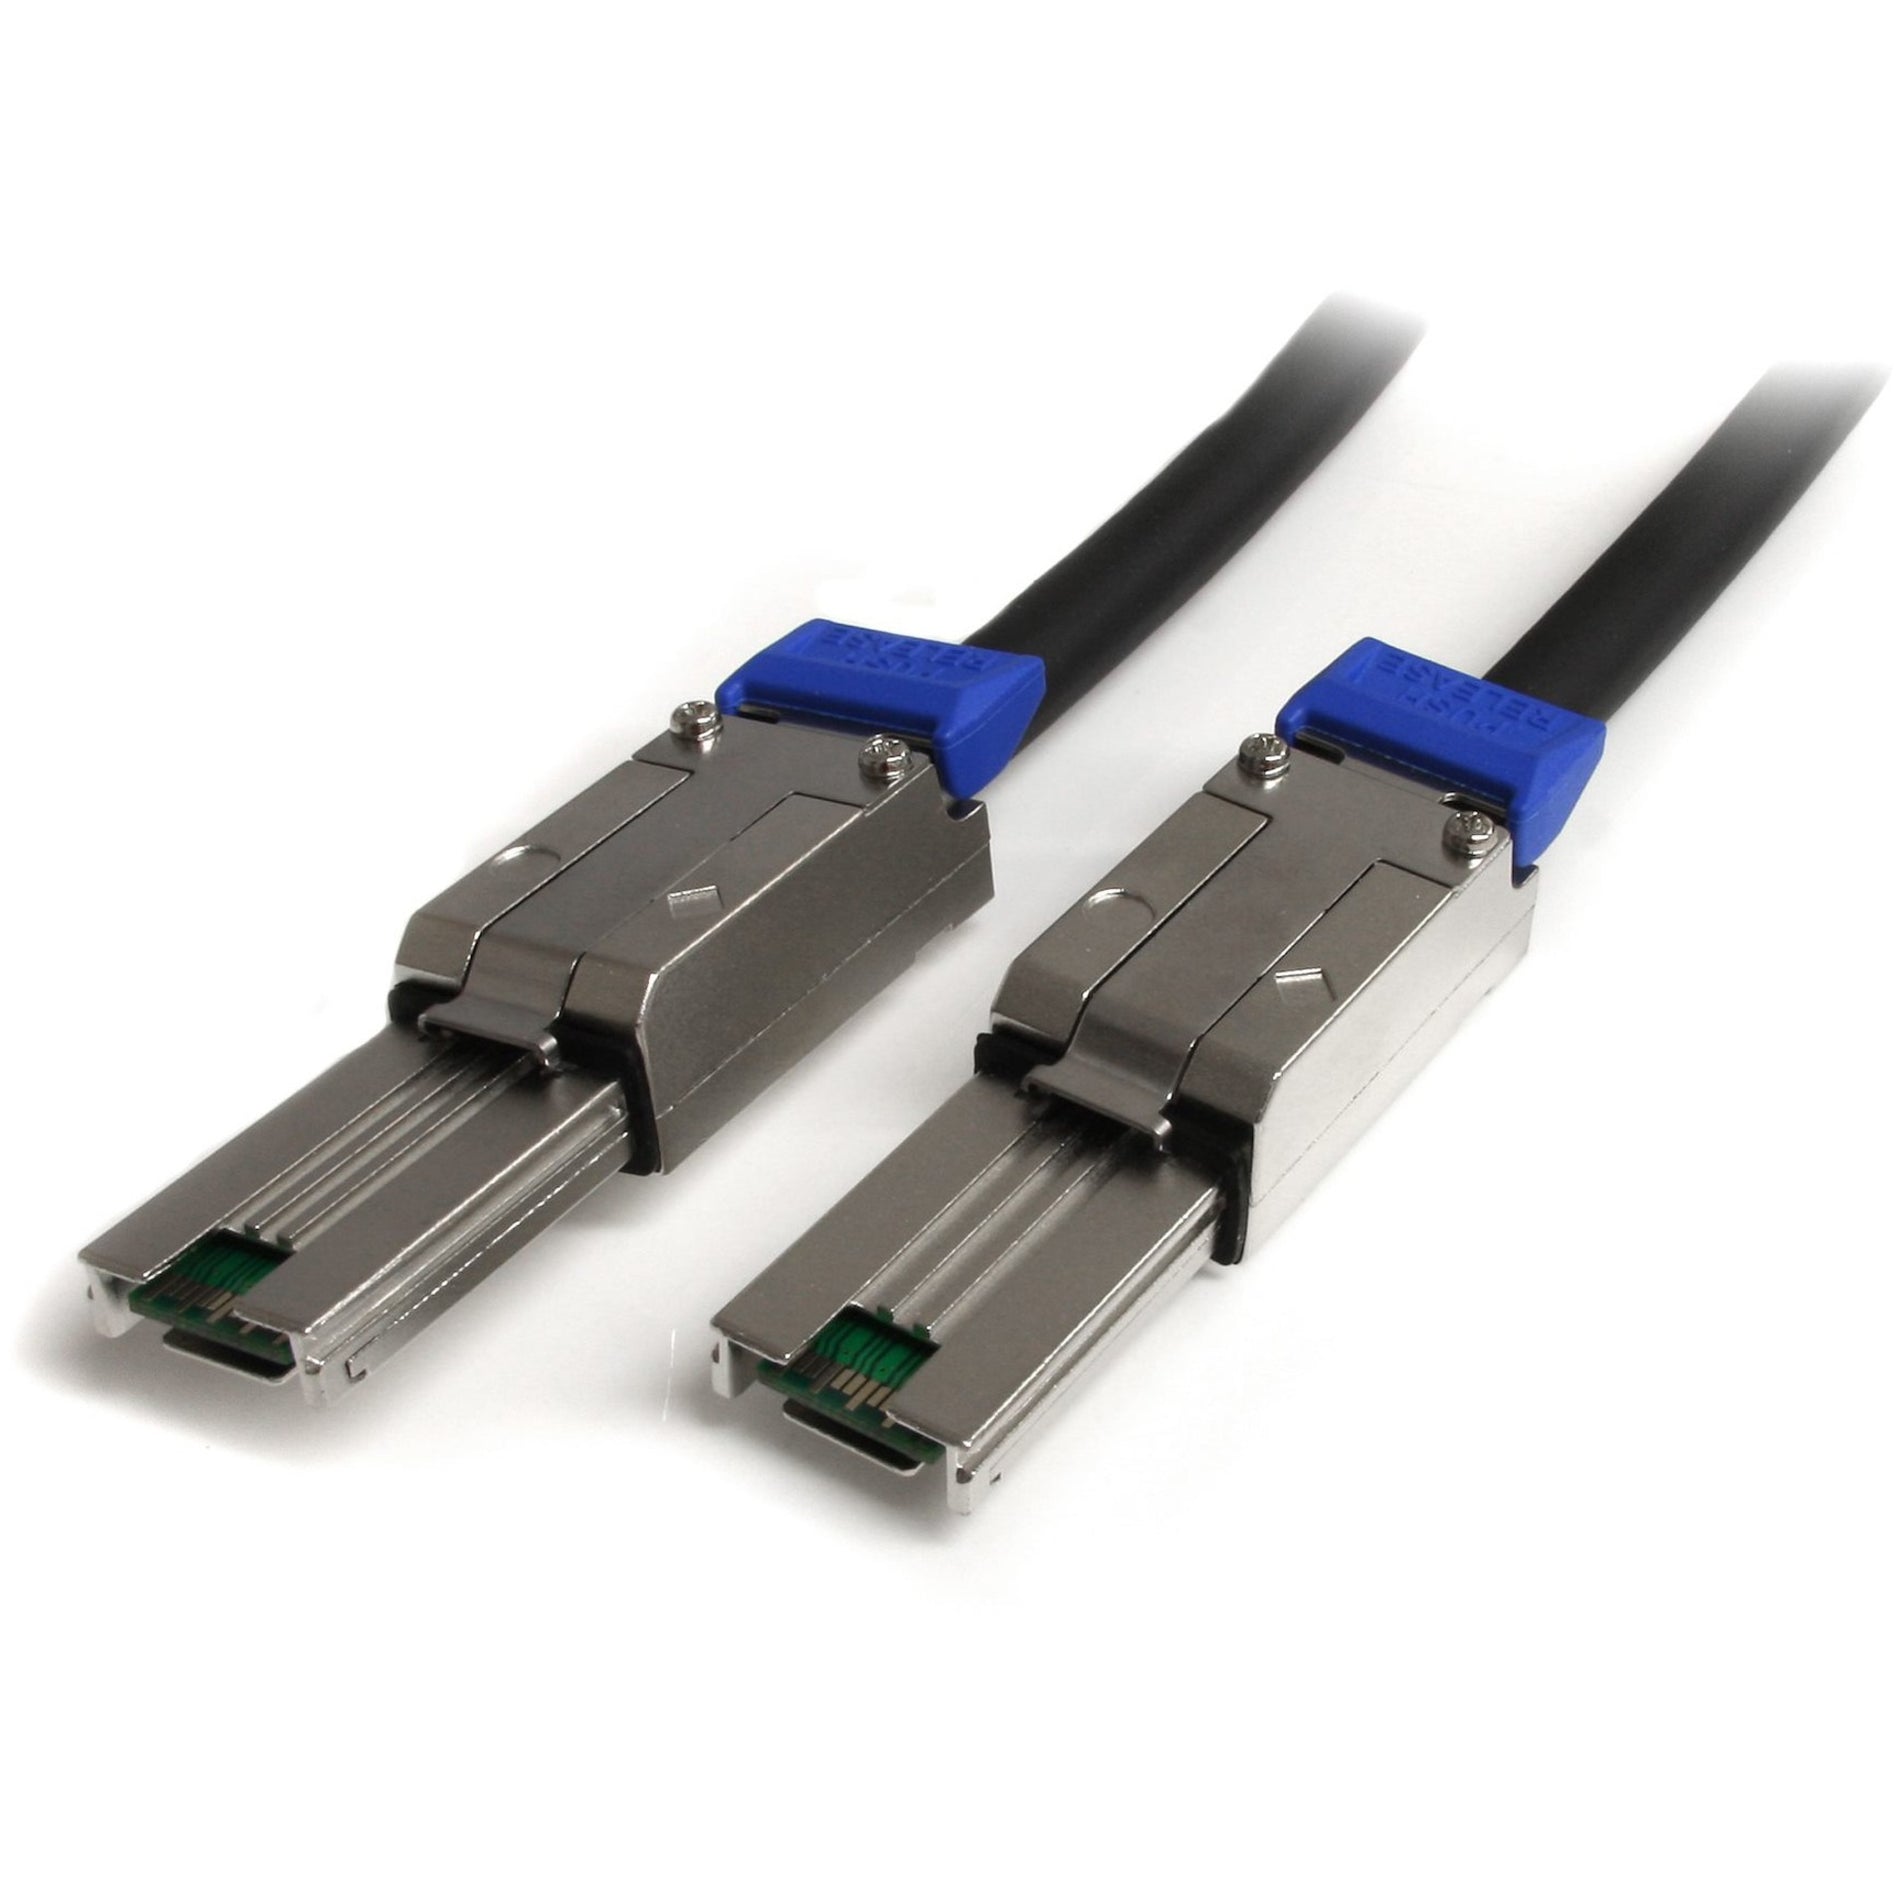 StarTech.com ISAS88881 1m External Mini SAS Cable - High-Speed Data Transfer, Latching Connector, 6 Gbit/s, Copper Conductor, Shielded, SAS Compatible